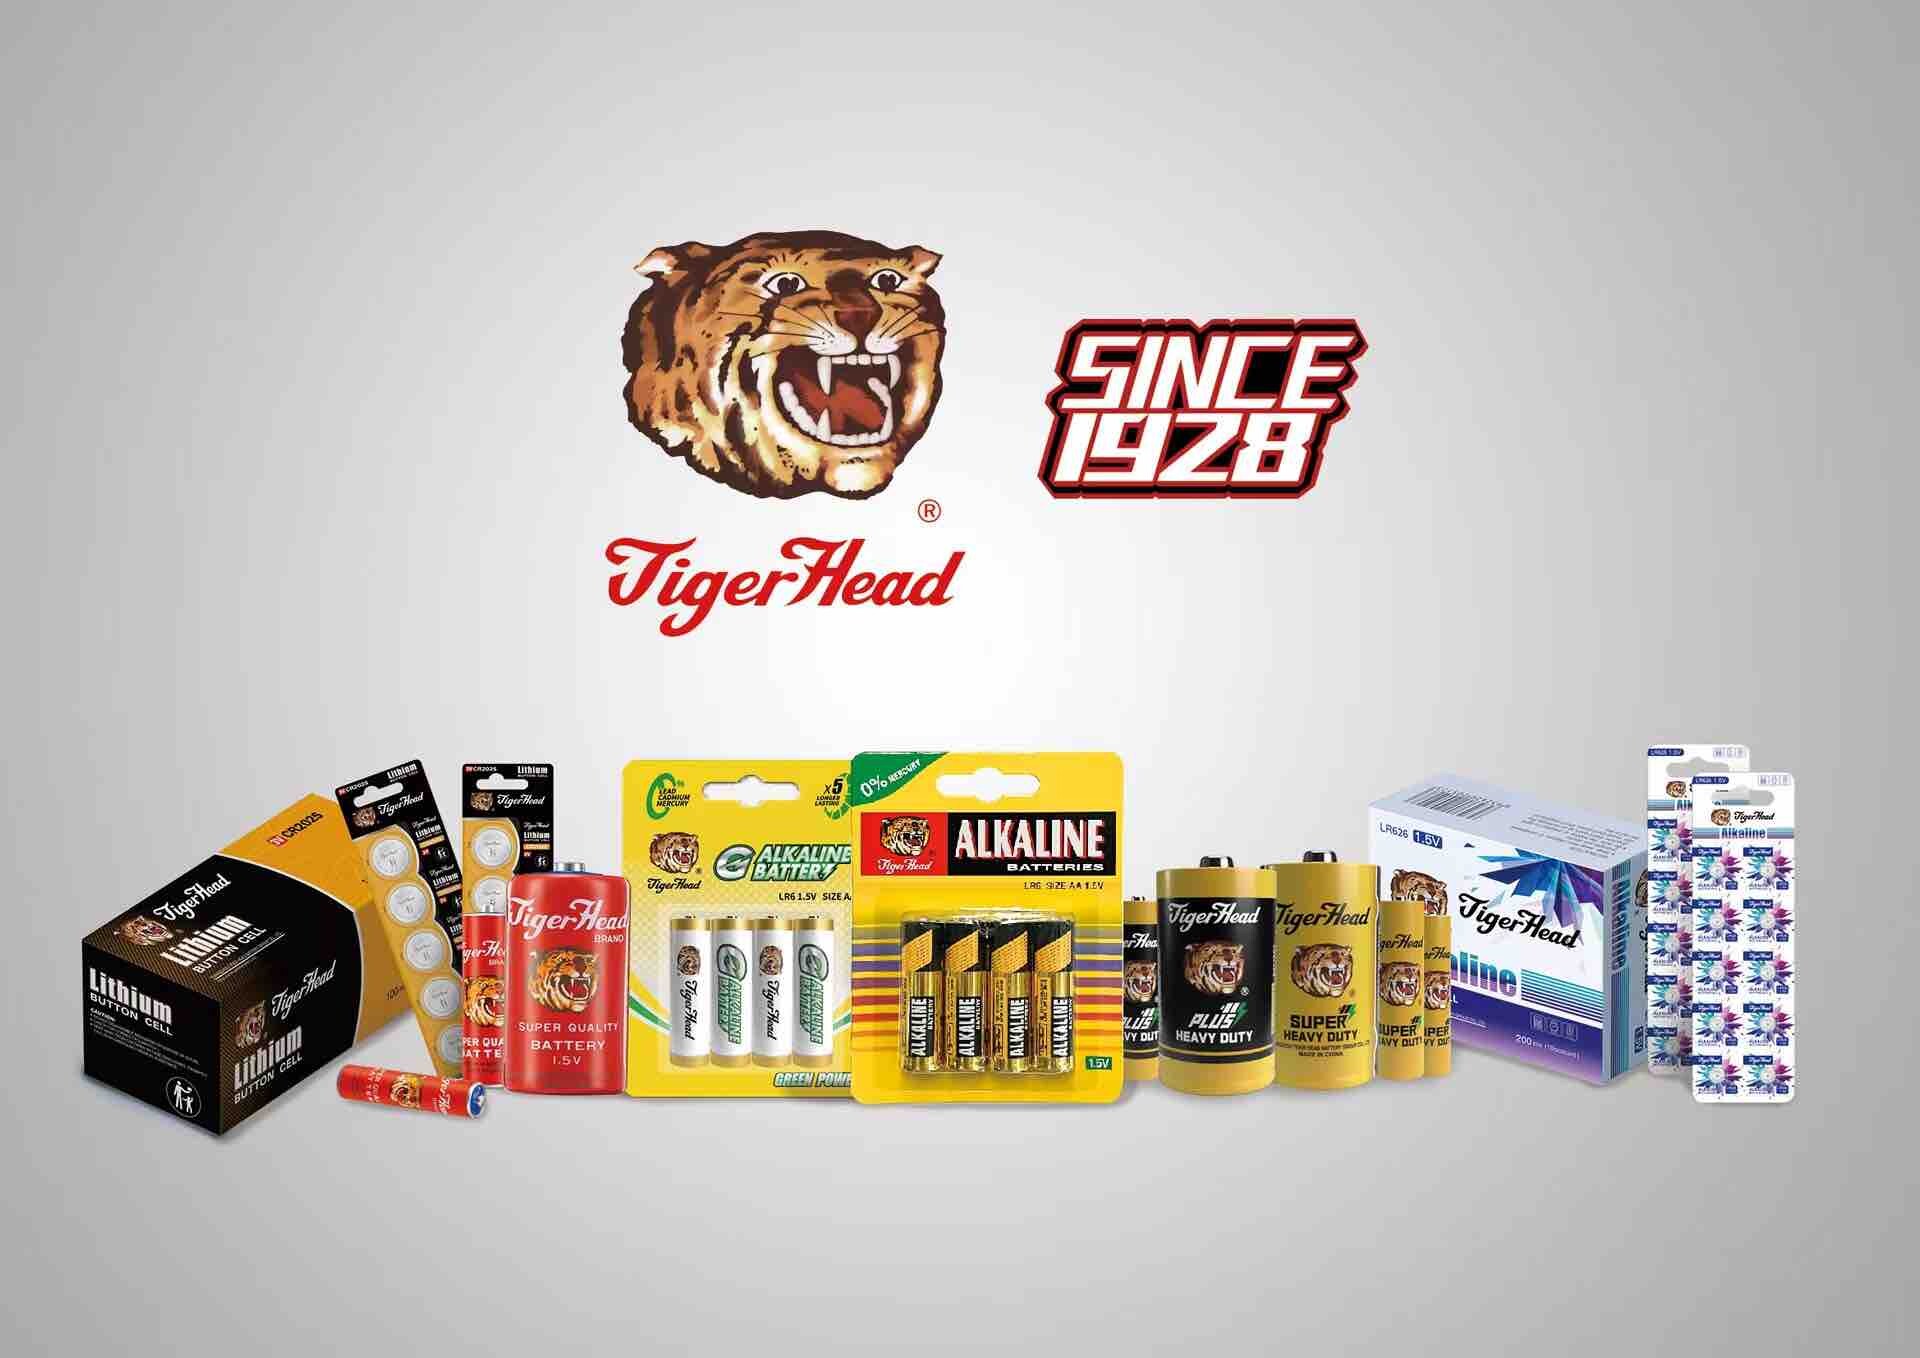 Tiger Head Battery company held a special meeting on environmental protection